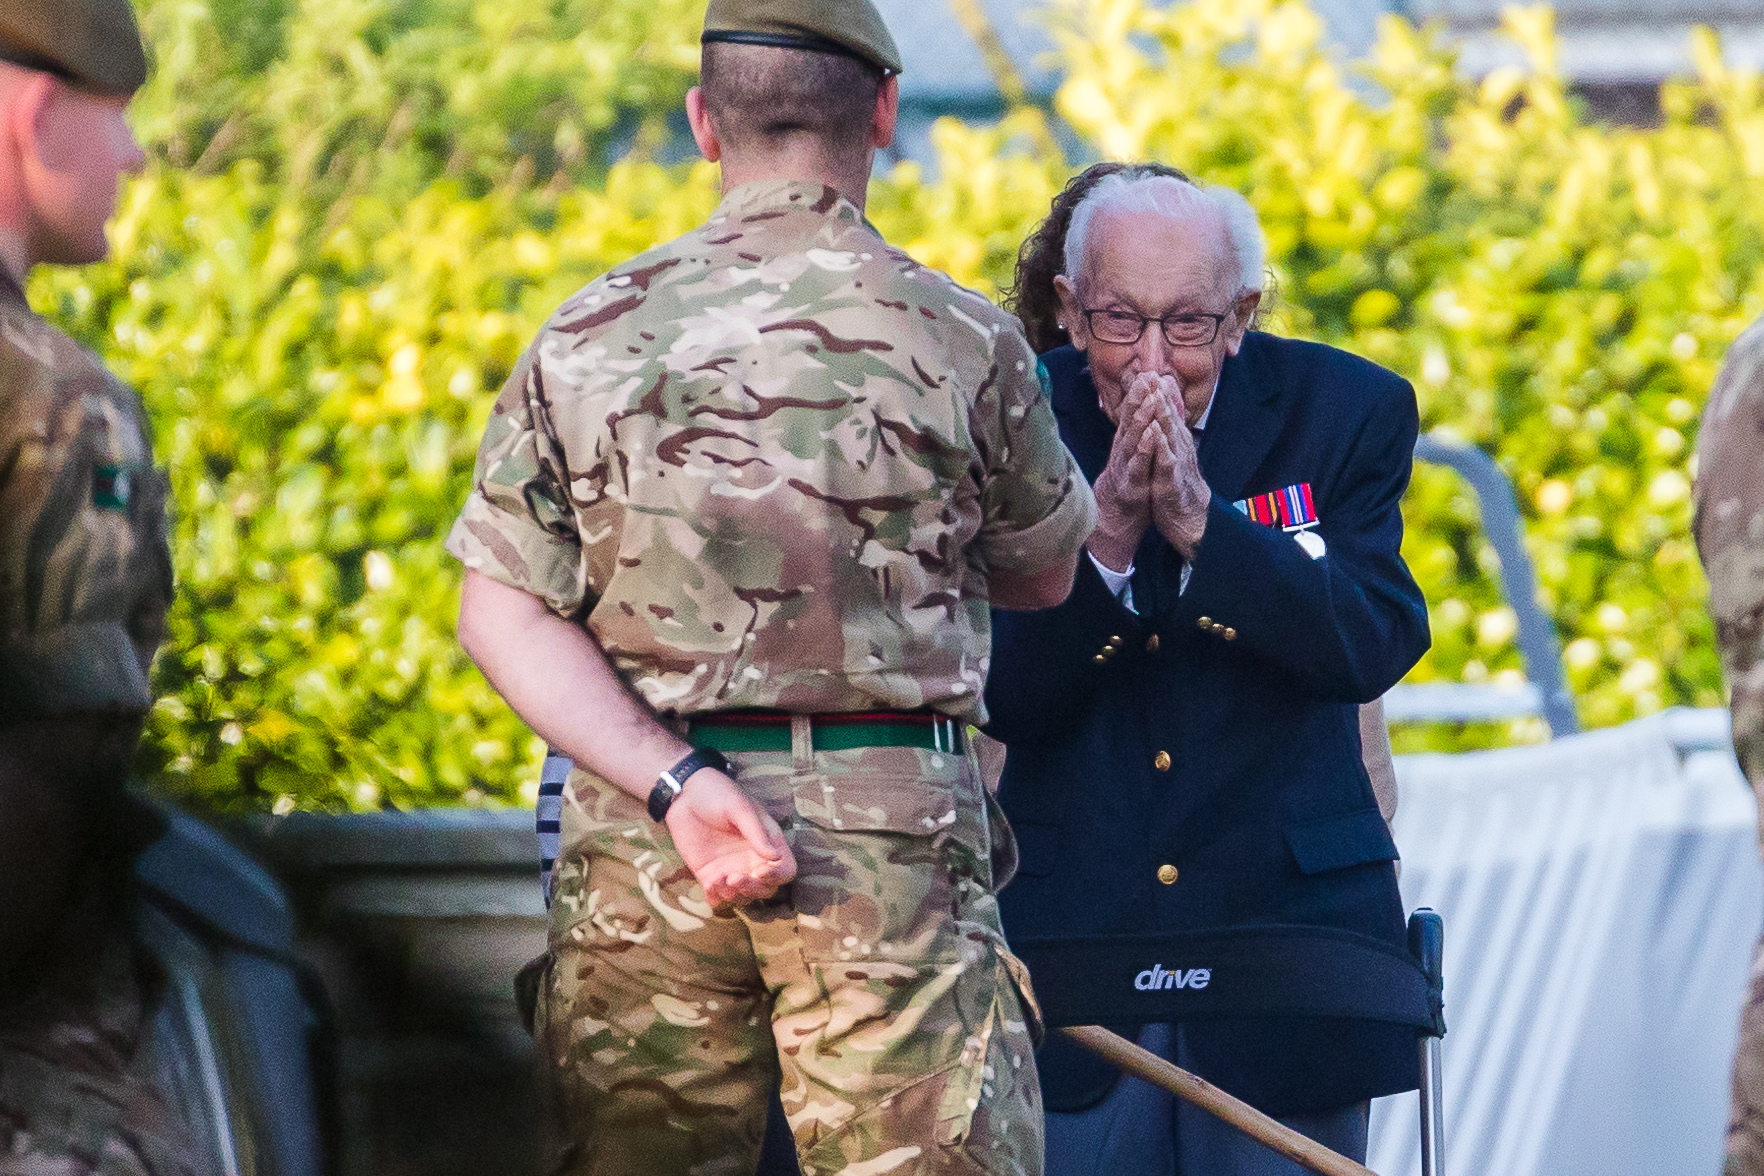 epa08365722 99-year-old British veteran Captain Tom Moore (R) reacts as he completes the 100th length of his back garden in Marston Moretaine, Bedfordshire, Britain, 16 April, 2020. Captain Tom Moore has raised over £12 million for Britain’s National Health Service (NHS) and has received donations to his fundraising challenge from around the world.  EPA/VICKIE FLORES